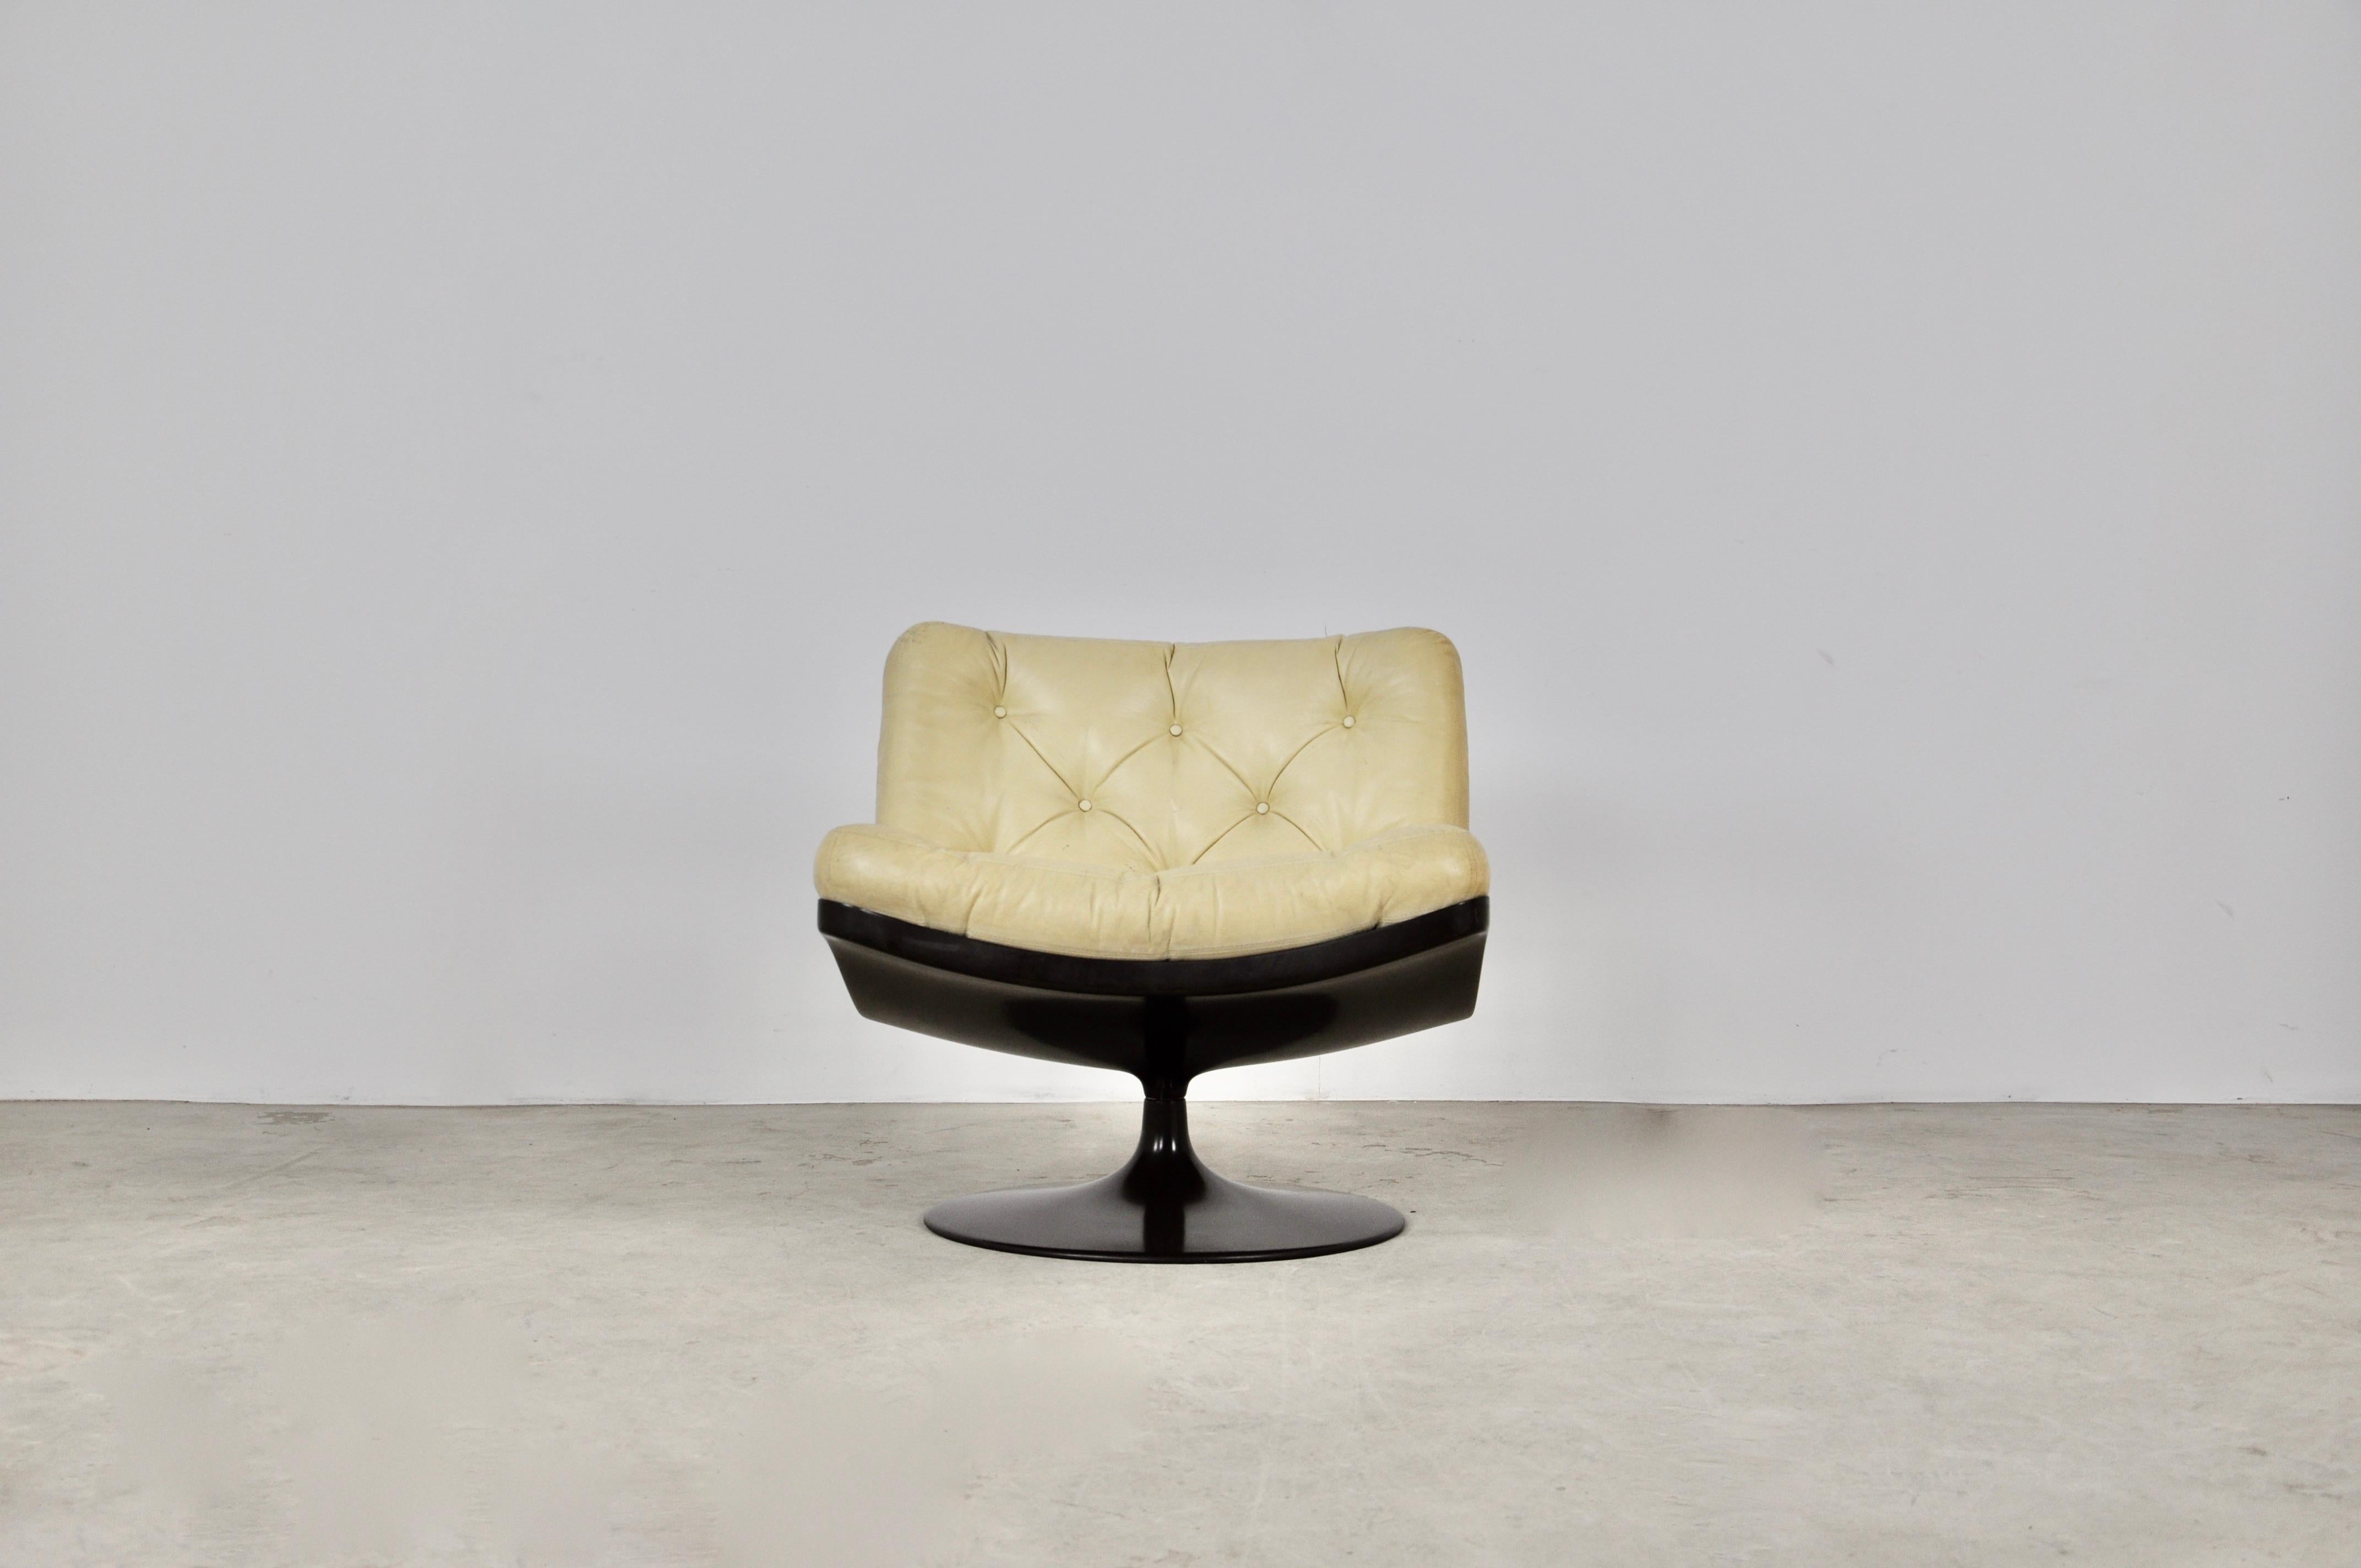 Fiberglass and leather armchair. Wear due to time and age of the chair. Measure: Seat height 42cm.